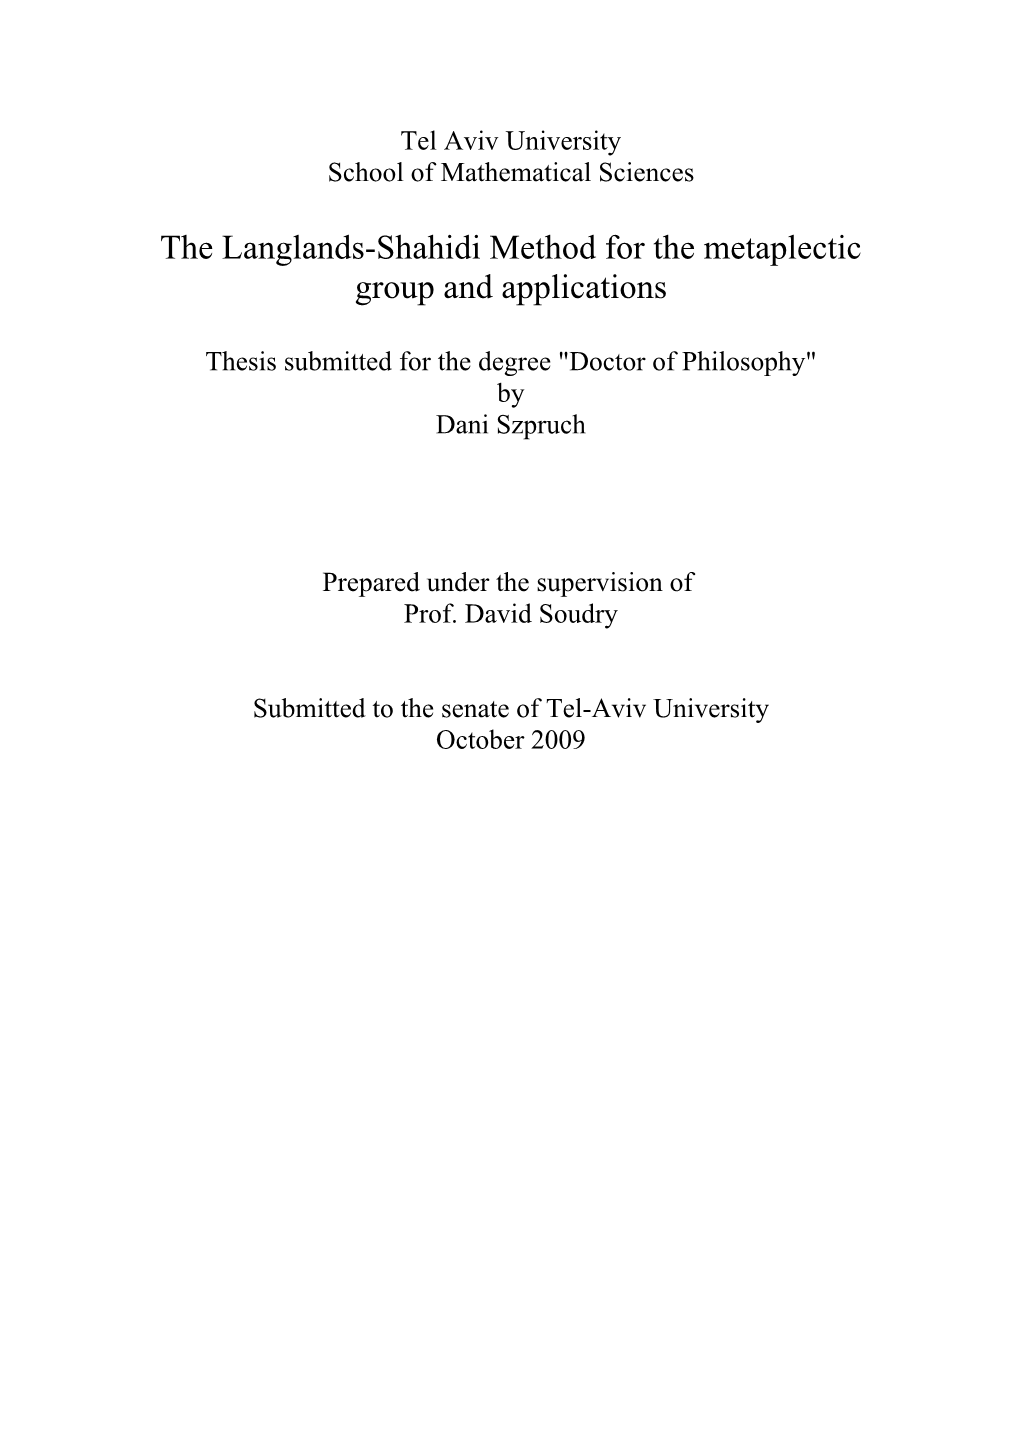 The Langlands-Shahidi Method for the Metaplectic Group and Applications